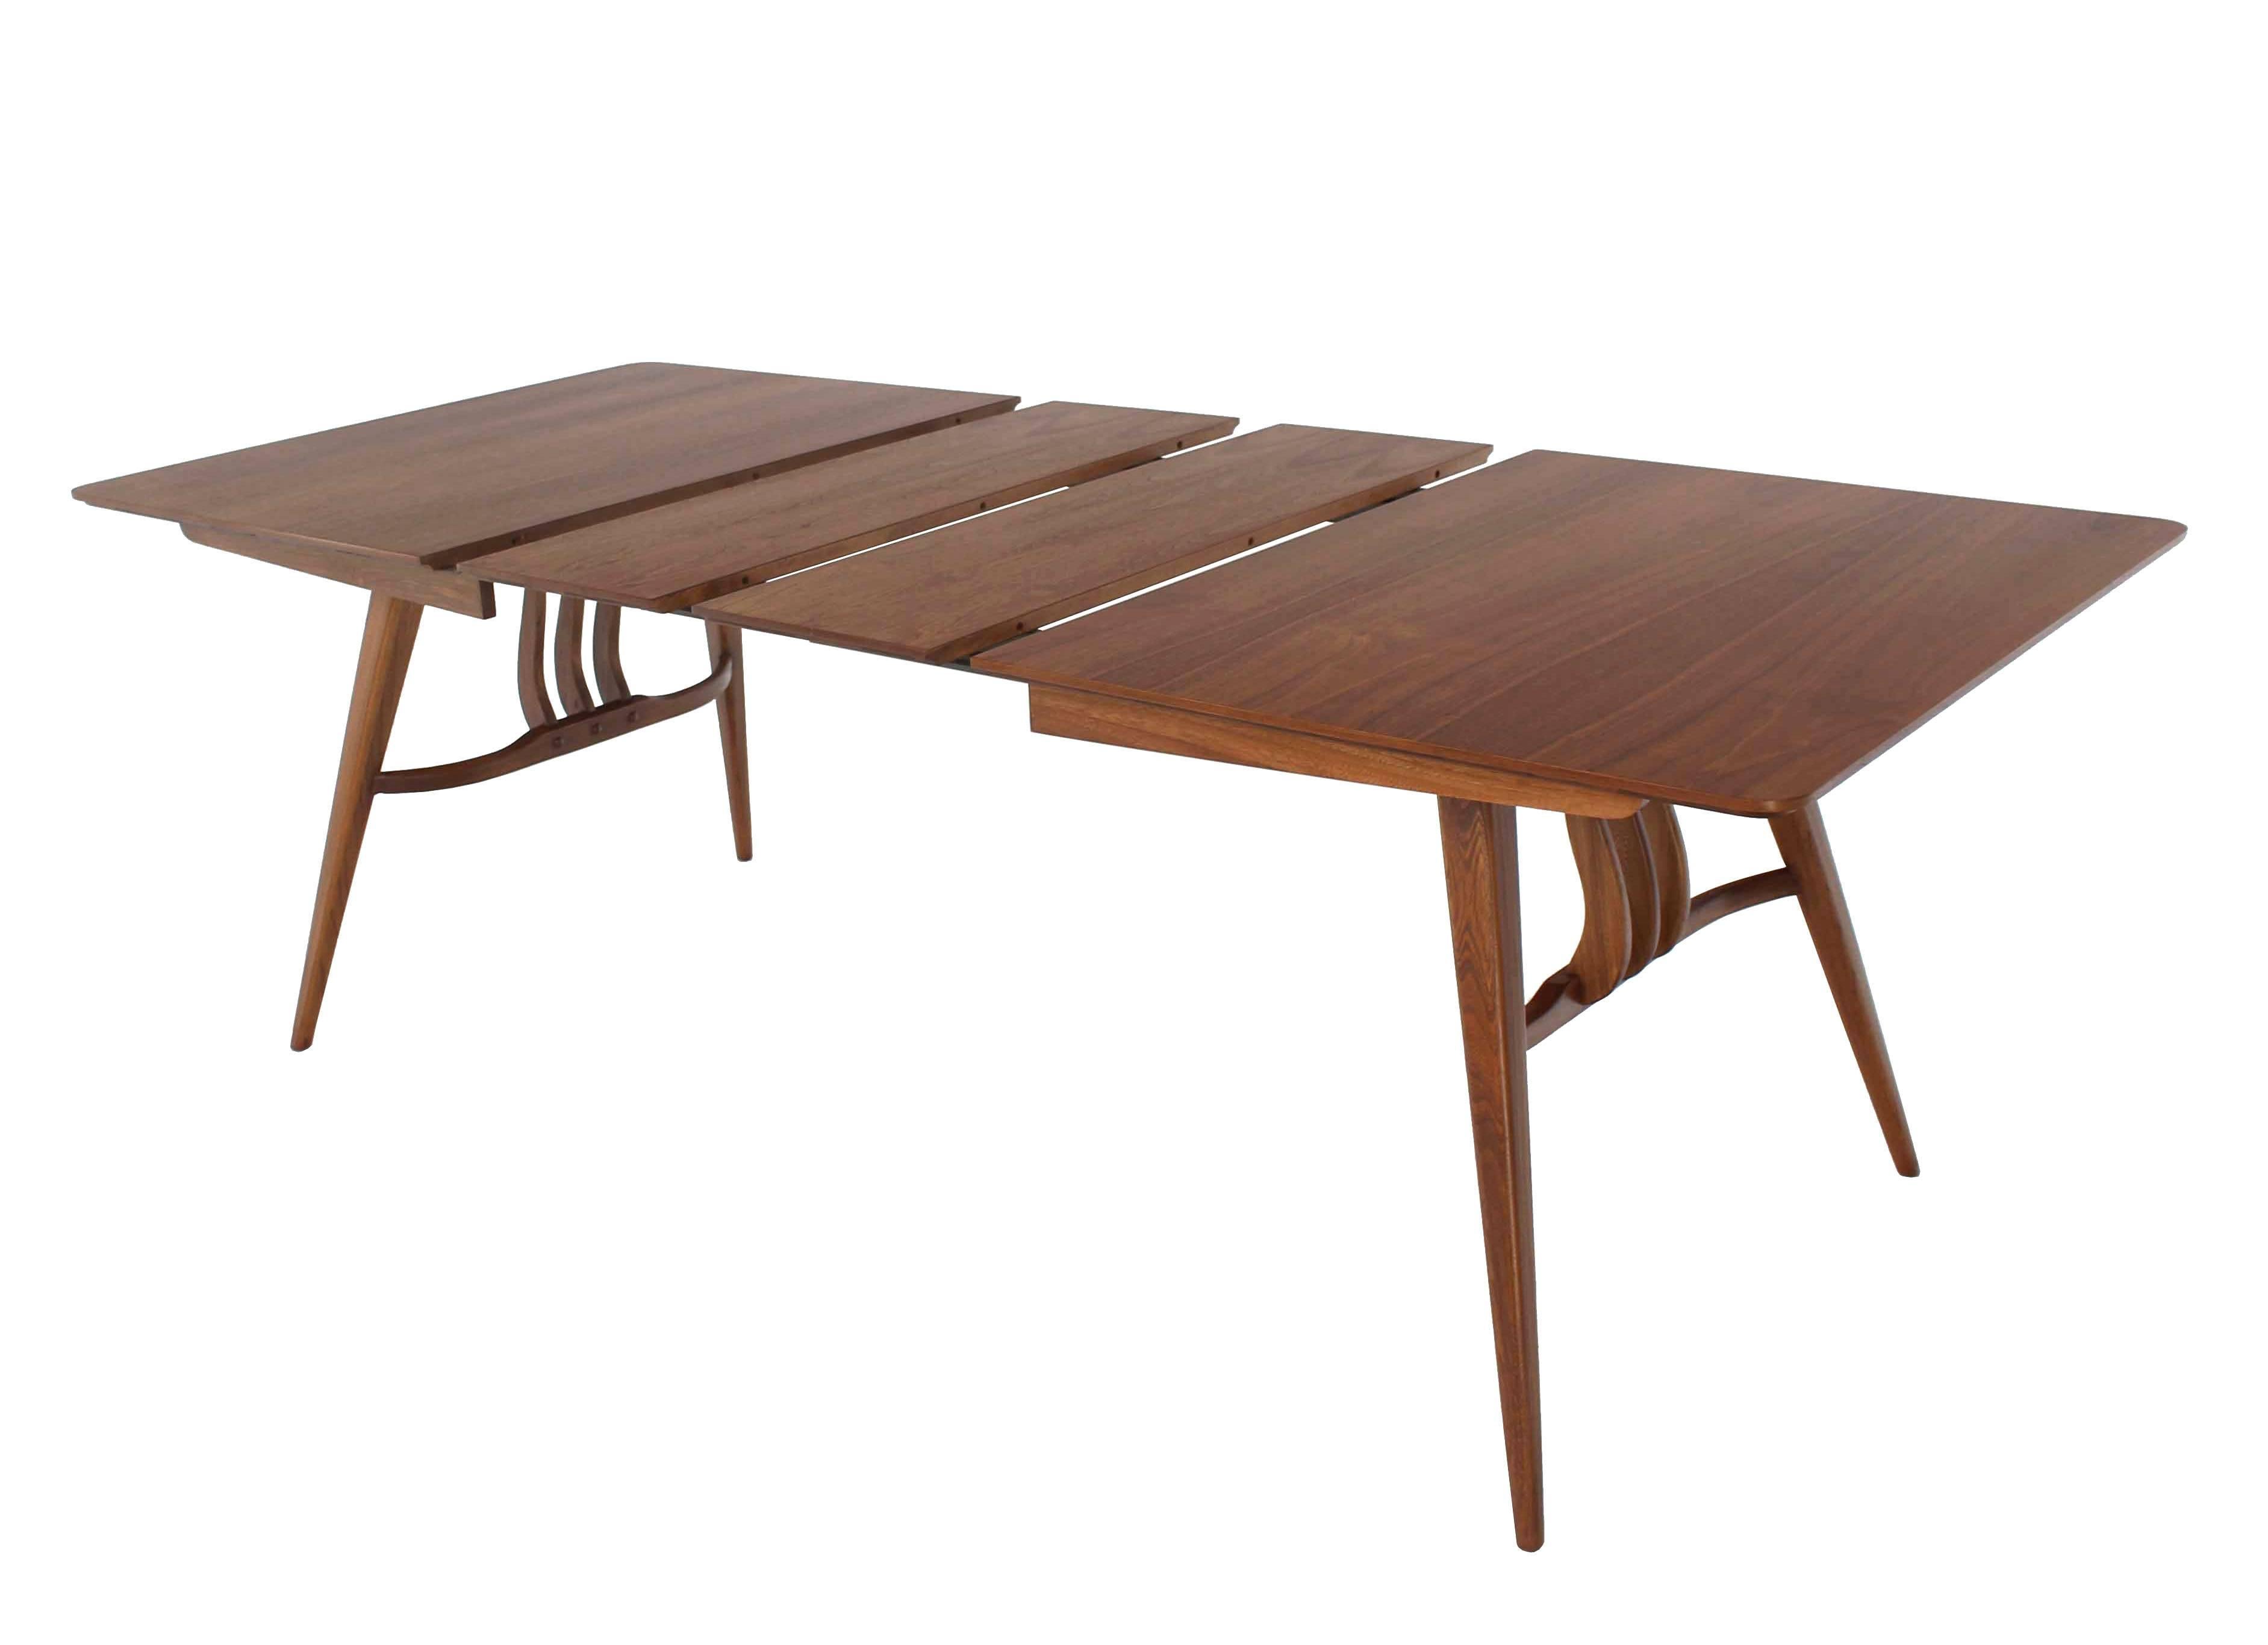 American Mid-Century Modern Walnut Sculptured Base Dining Table For Sale